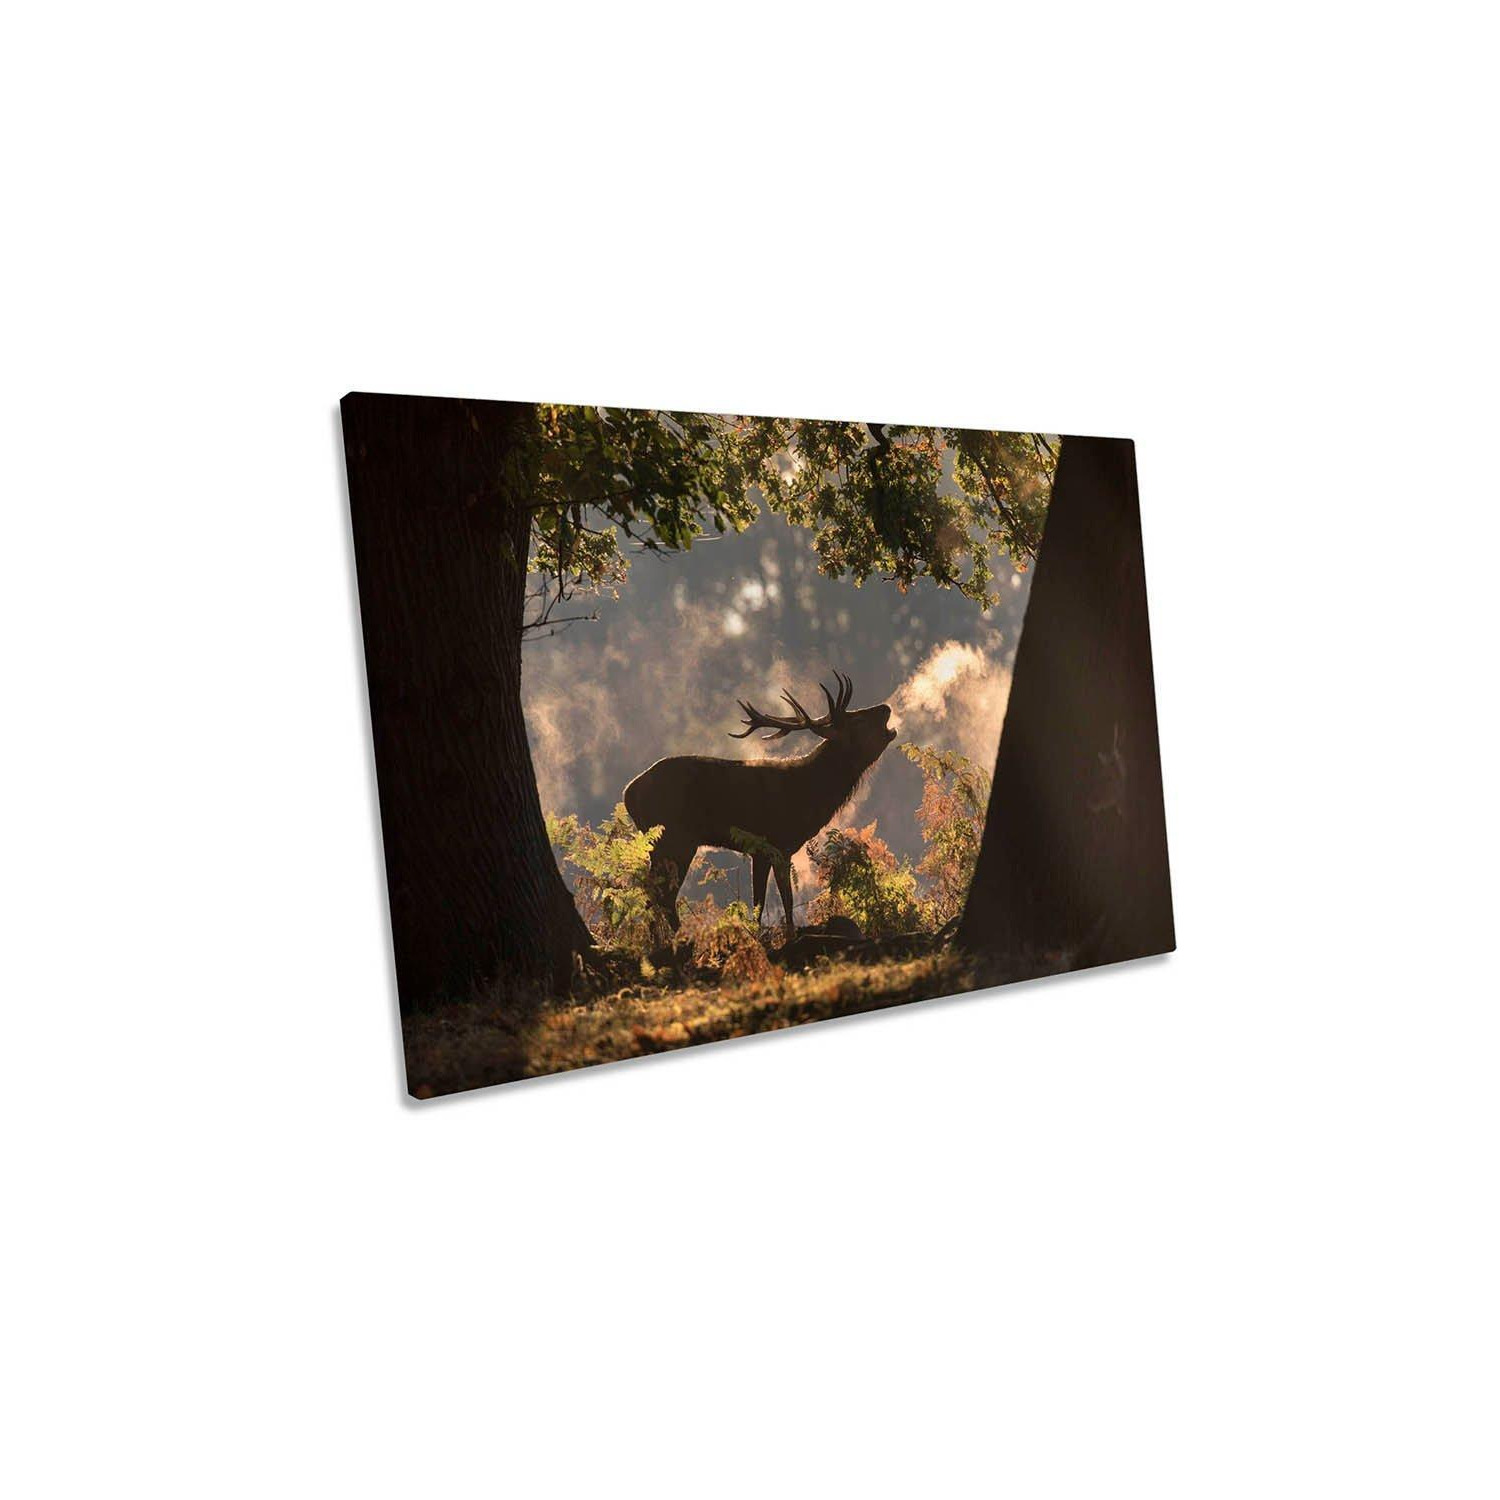 He Waits in the Shadows Stag Wildlife Canvas Wall Art Picture Print - image 1